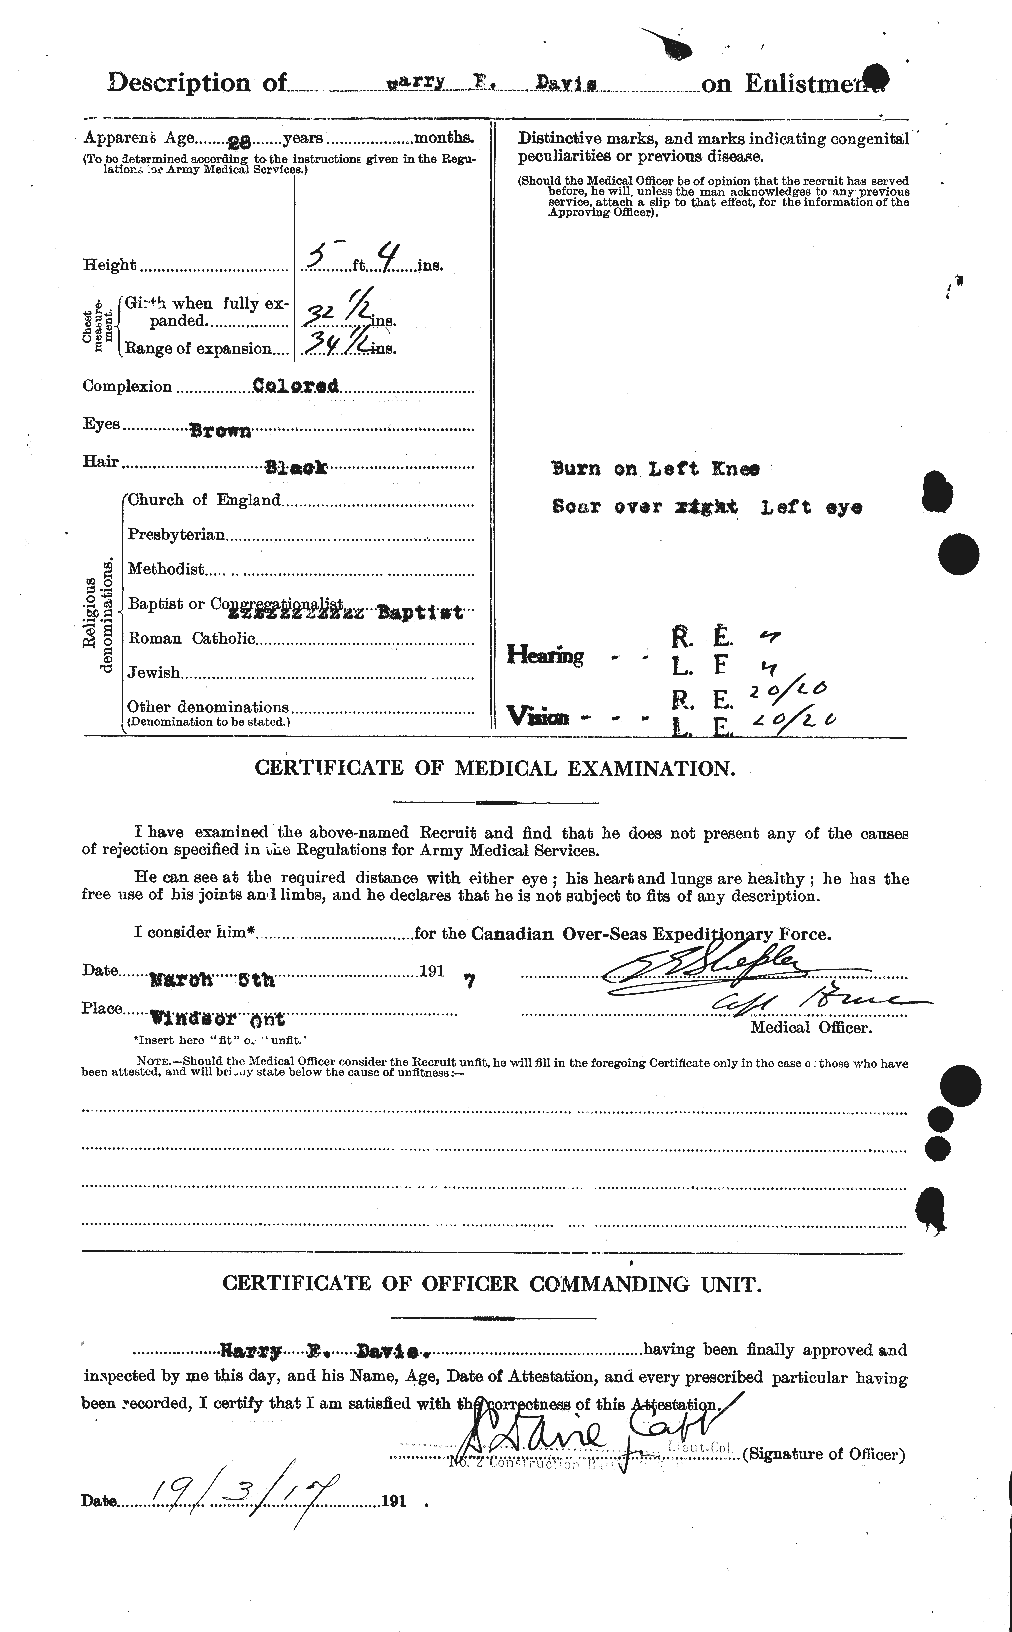 Personnel Records of the First World War - CEF 283890b